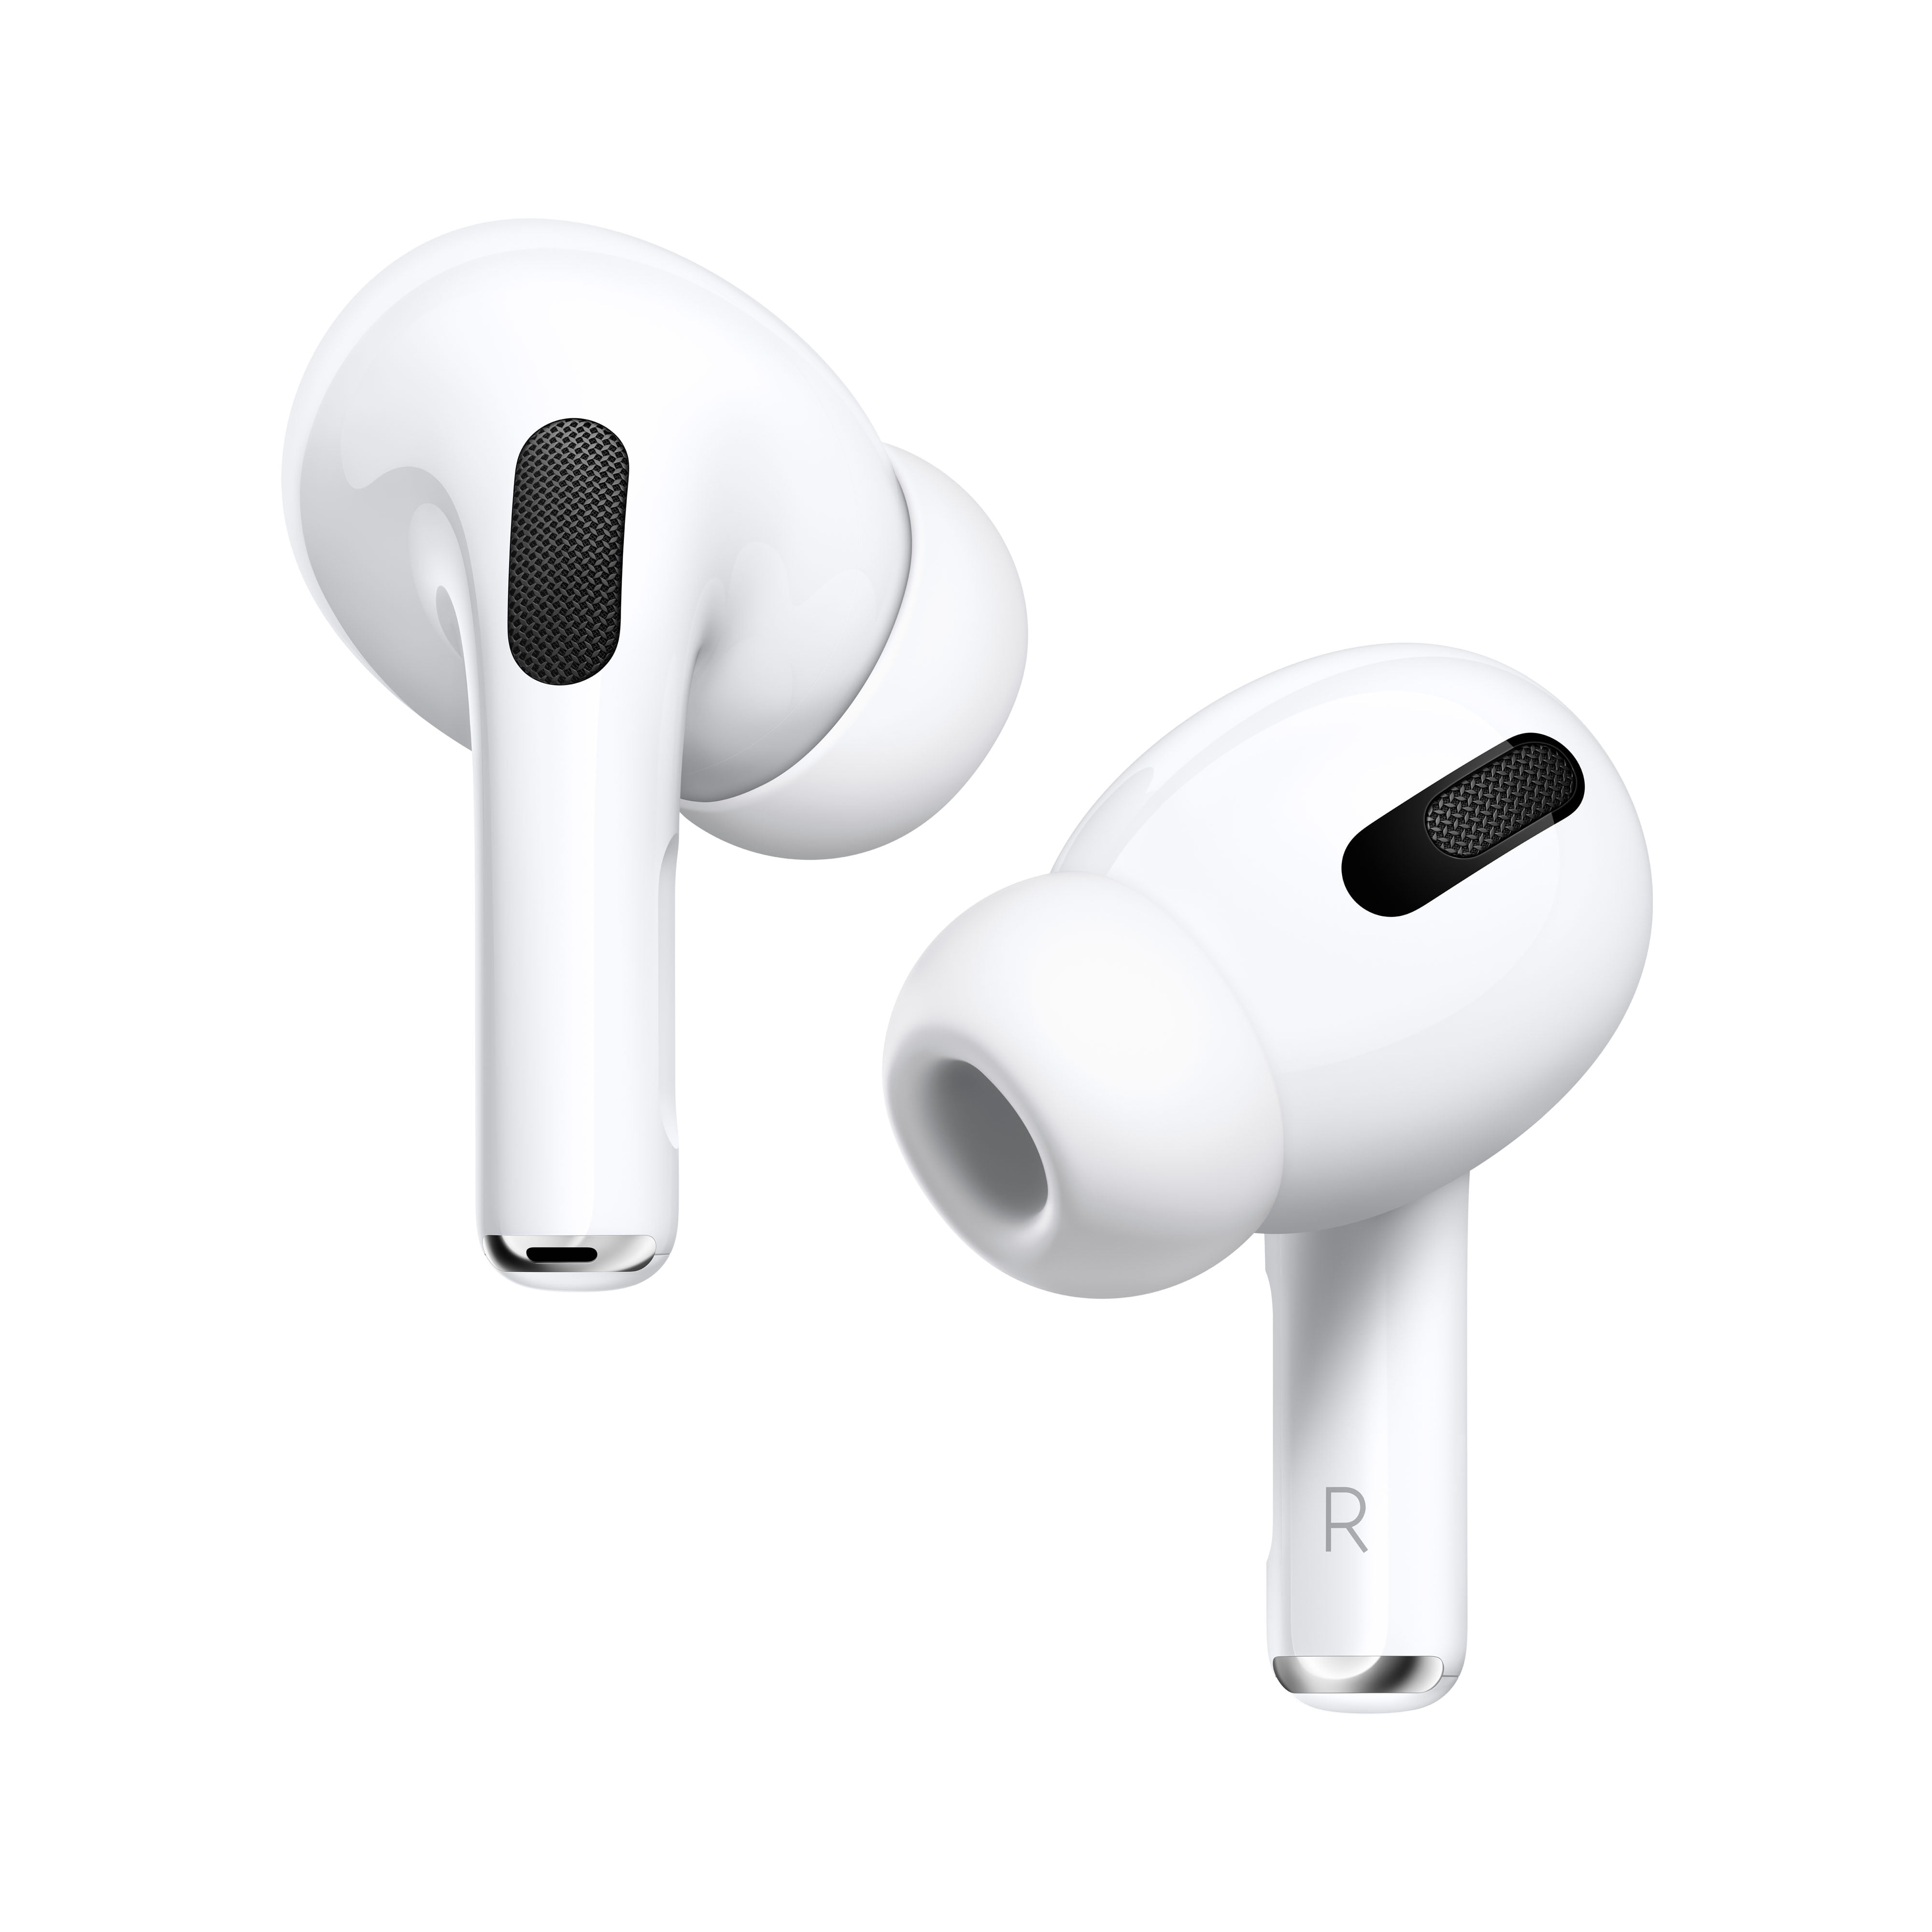 Apple AirPods Pro Wireless Earbuds w/ Charging Case, MWP22AM/A - White